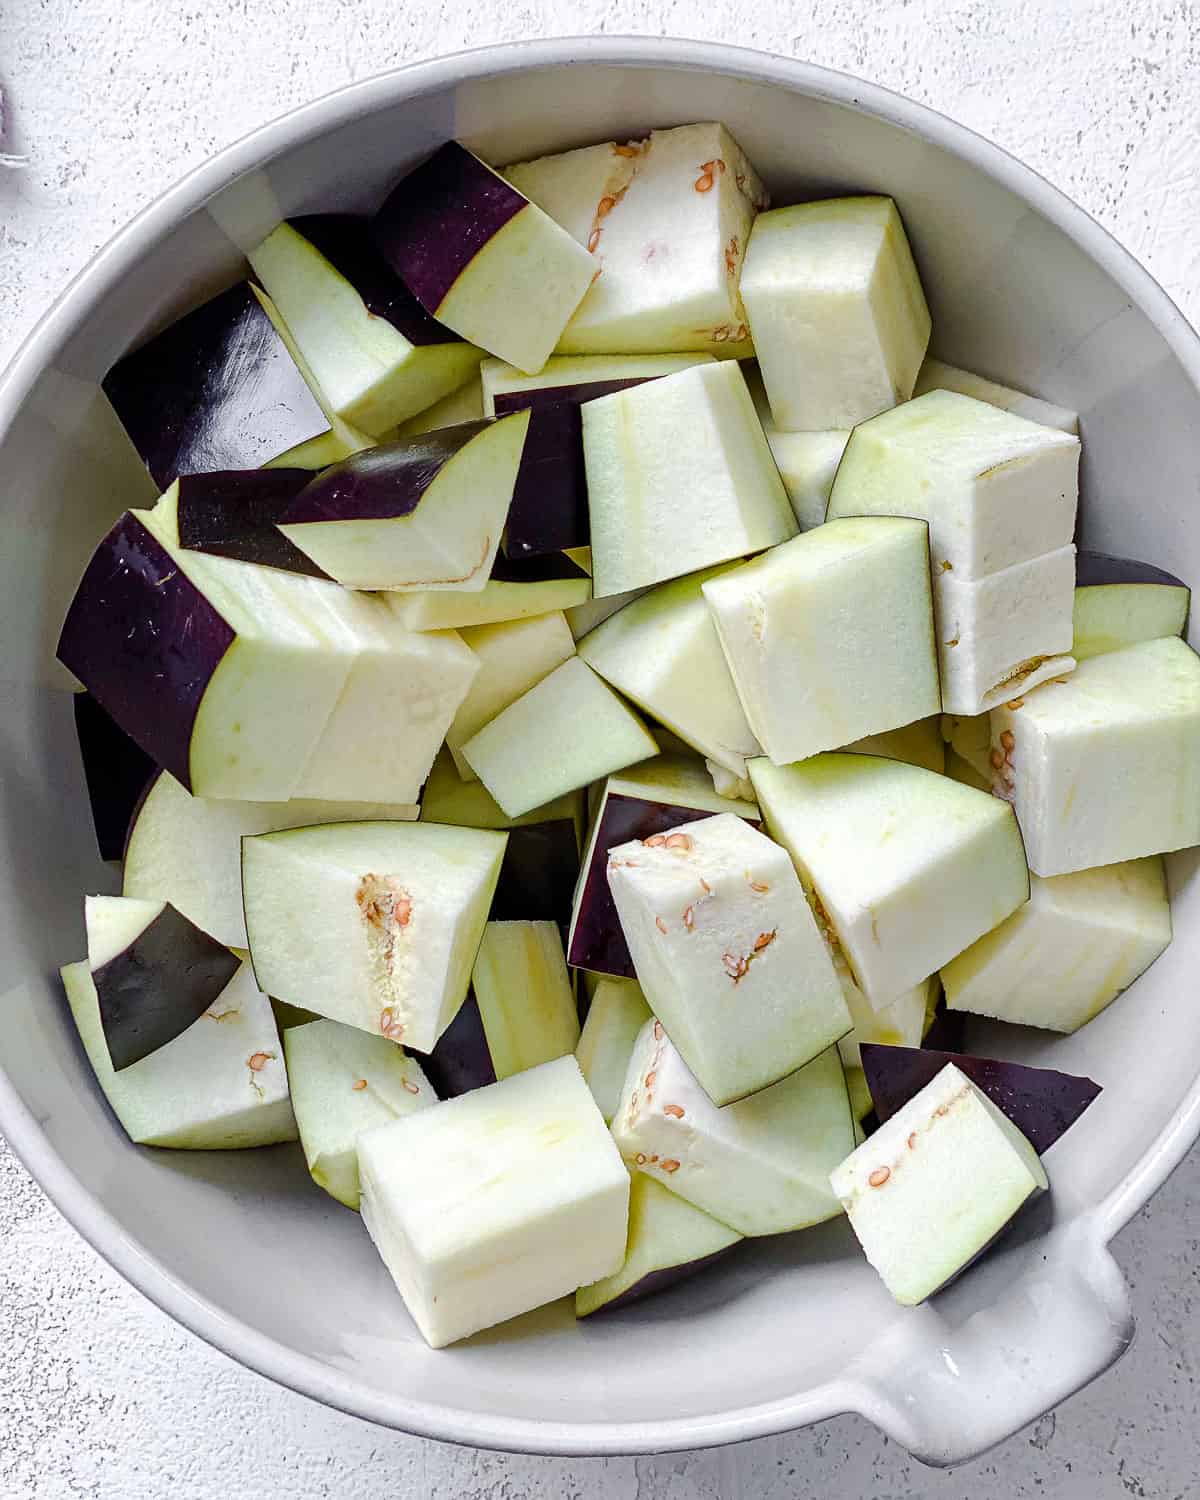 c،pped eggplant in a white bowl